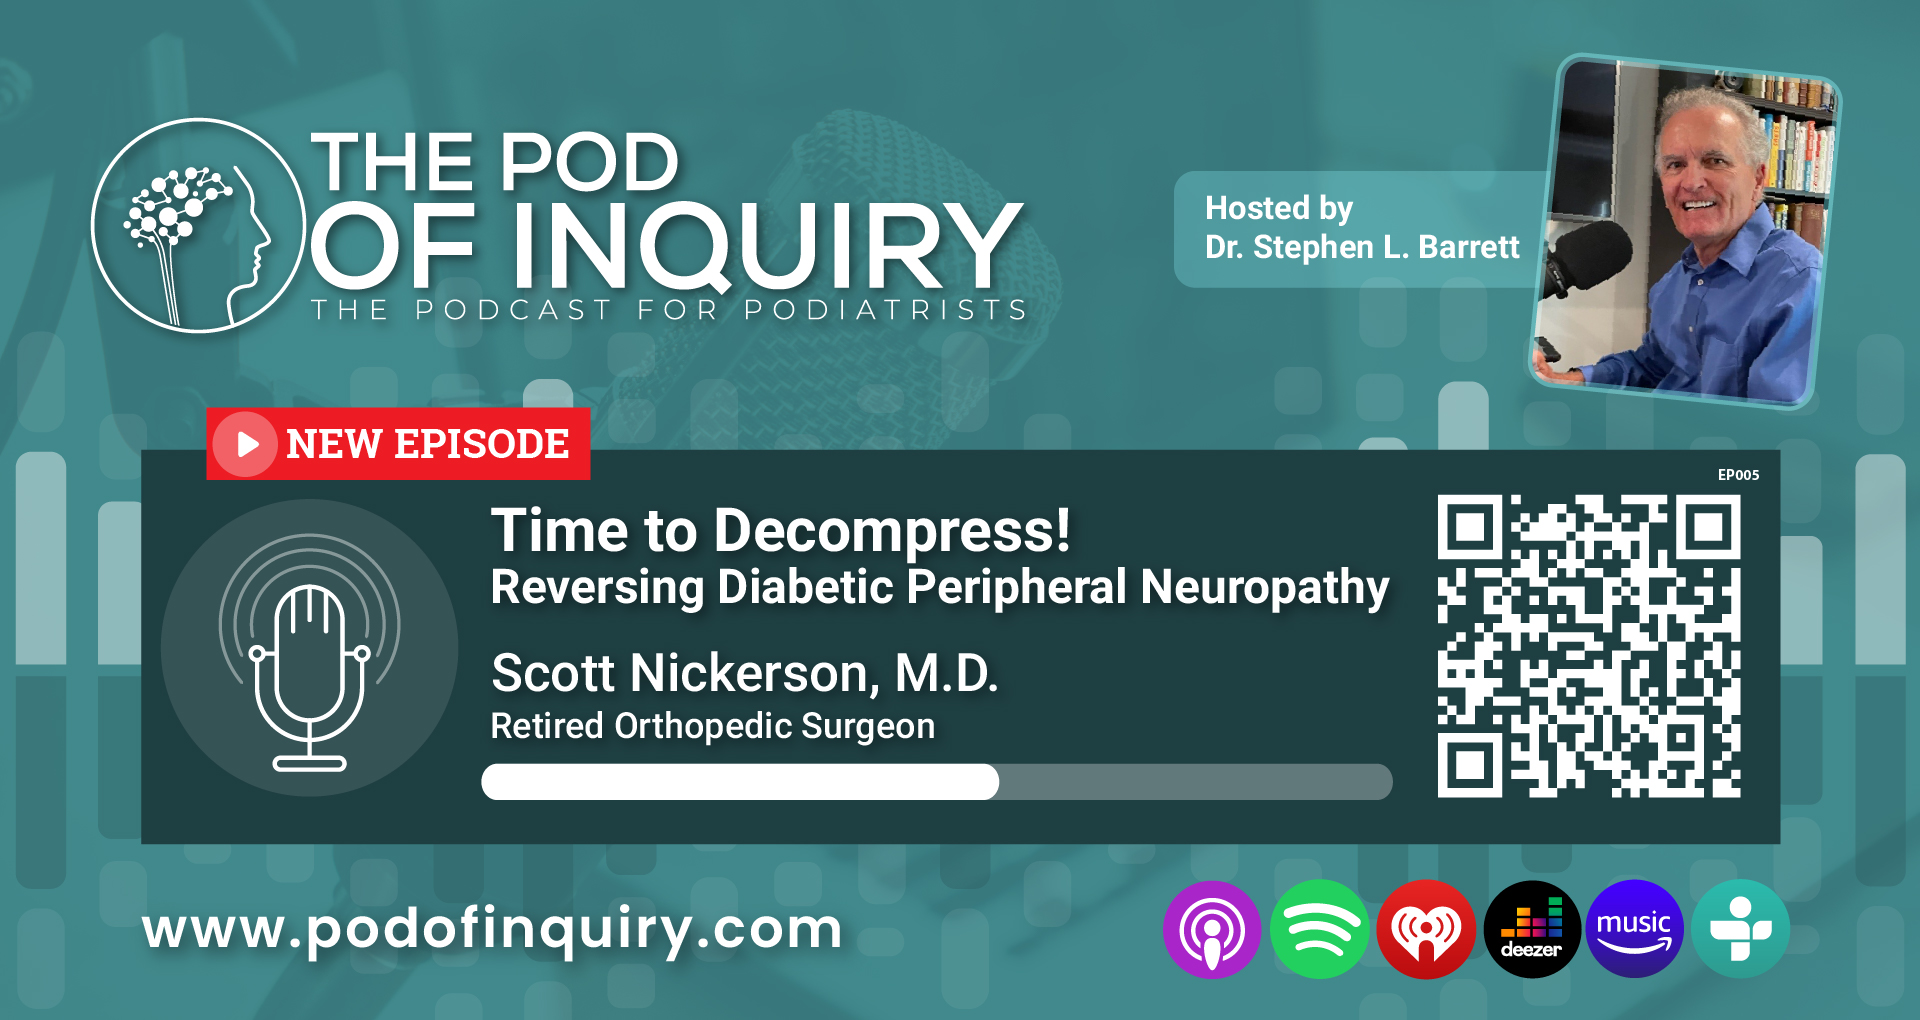 Time to decompress, reversing diabetic peripheral neuropathy with guest Scott Nickerson, M.D. - Retired Orthopedic Surgeon